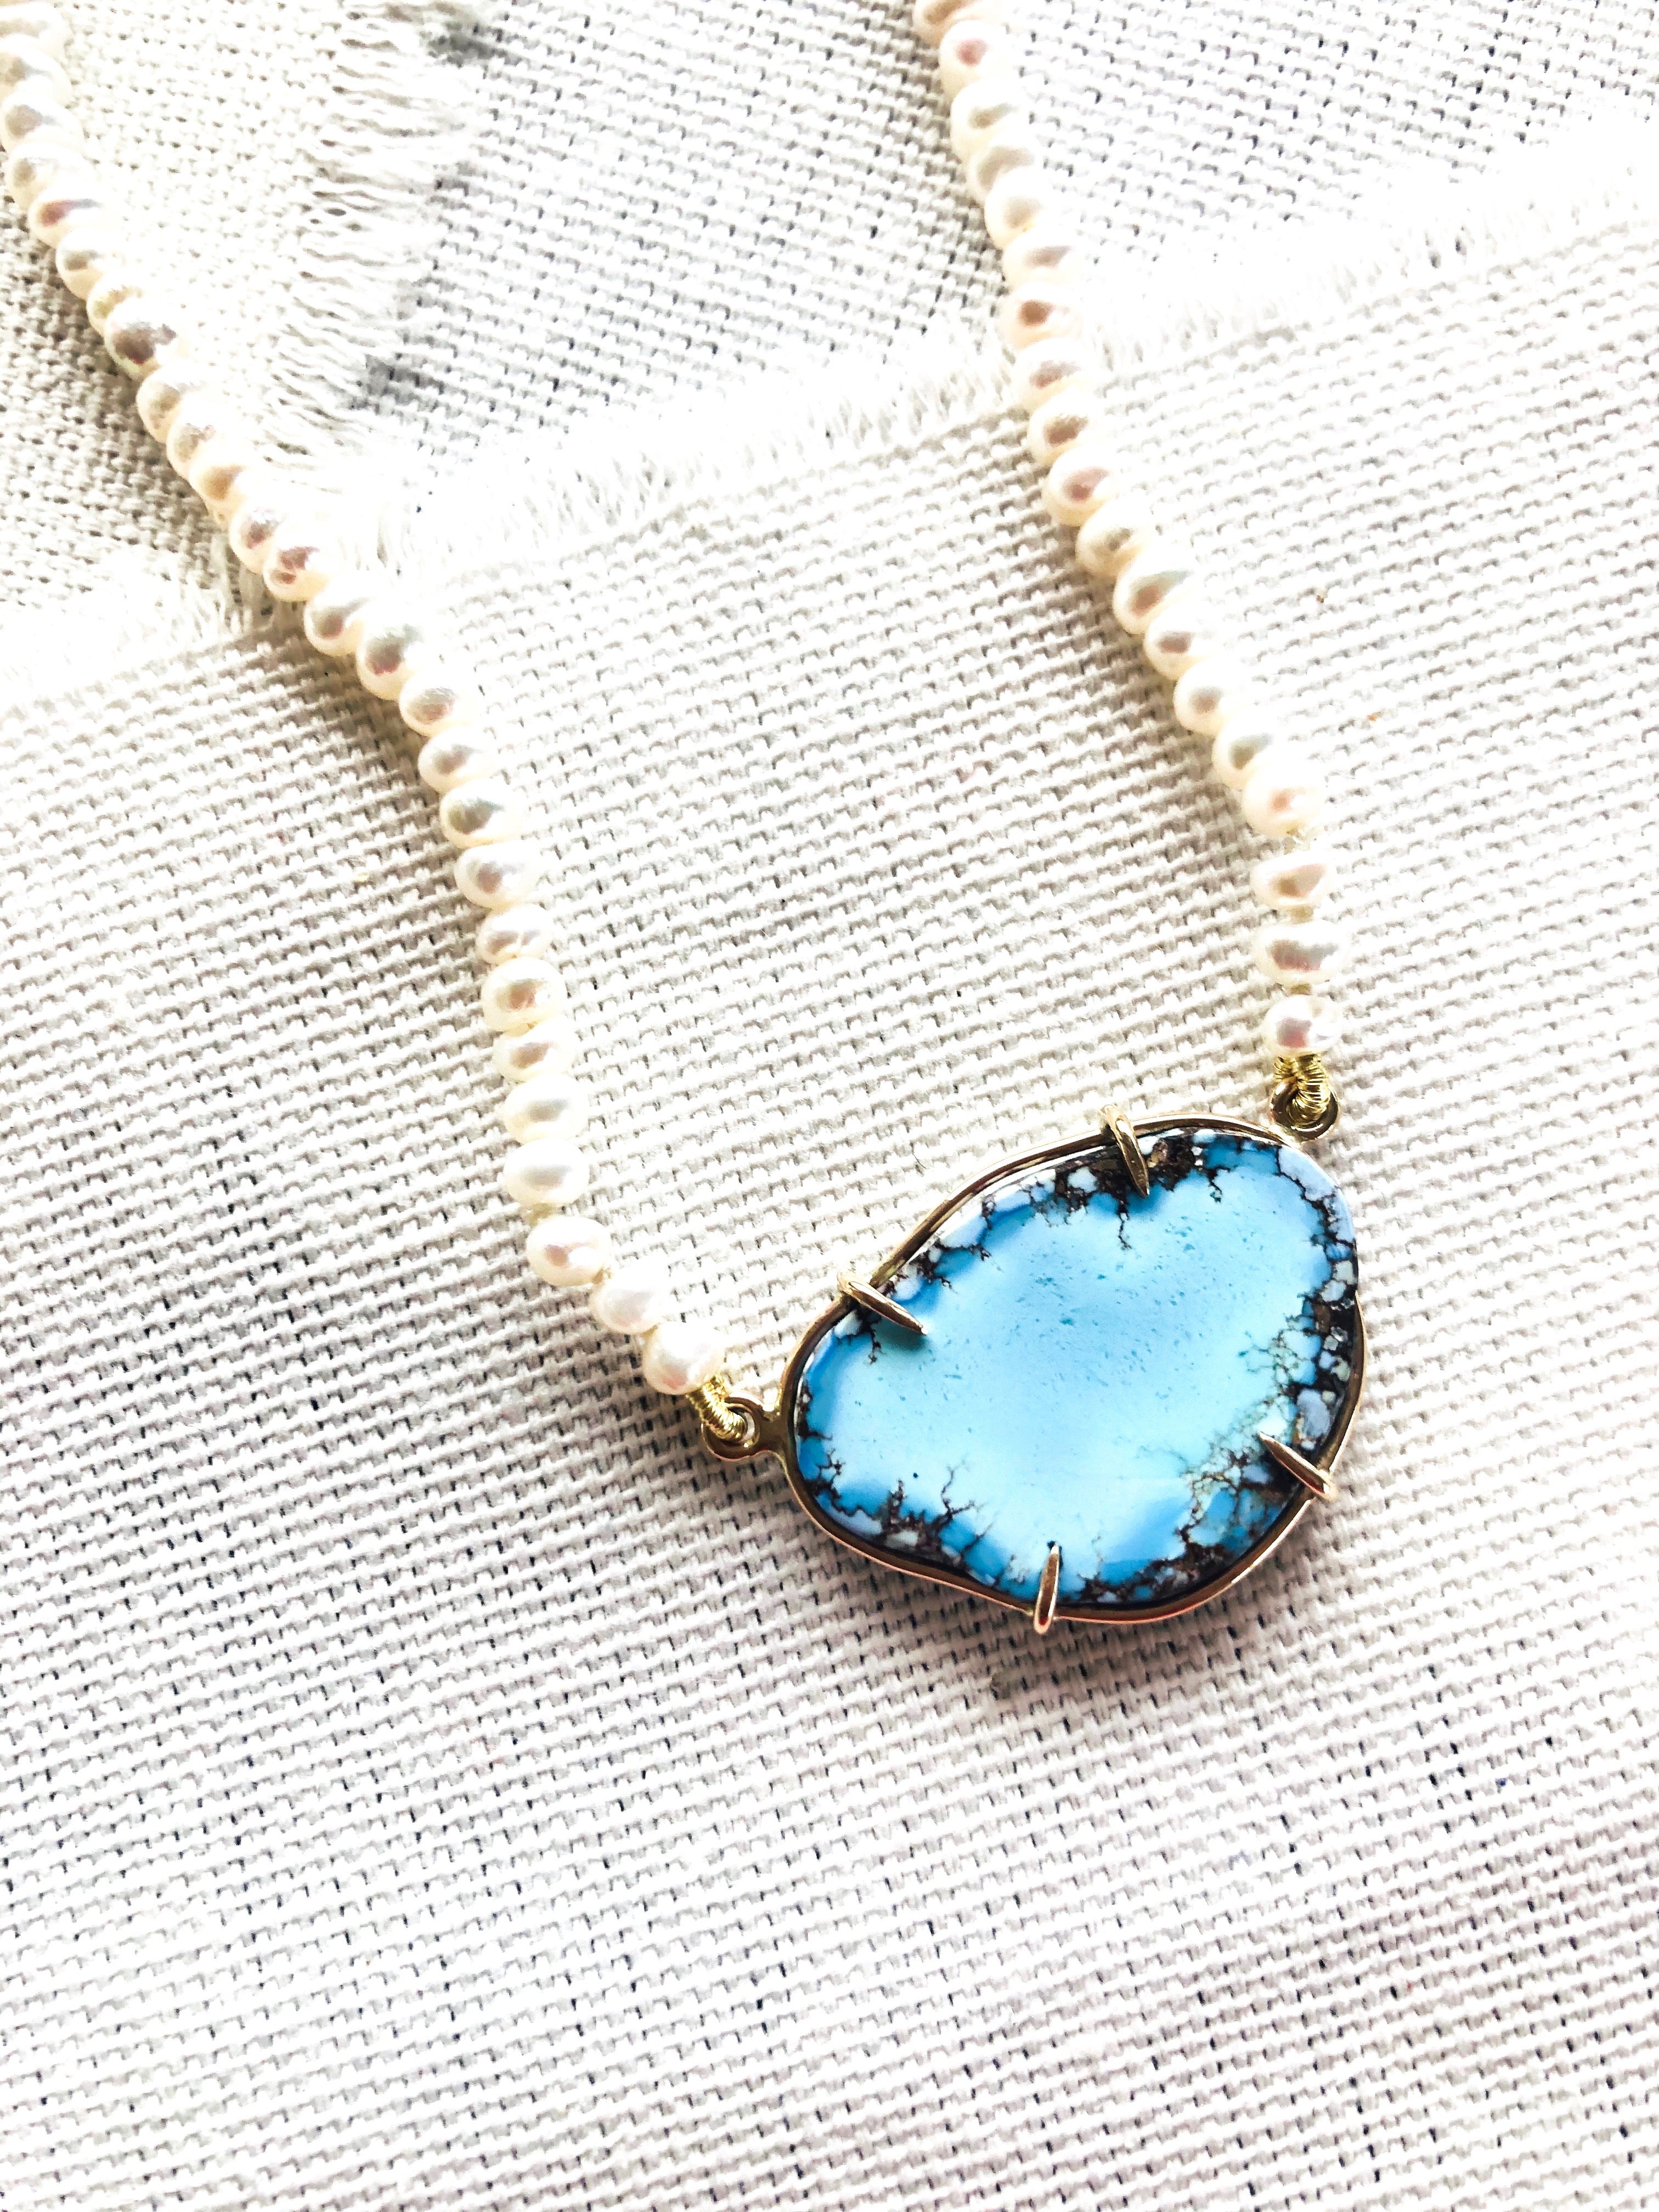 Let this beautiful effortlessly chic Kazakhstan turquoise necklace compliment your beach holiday. Kazakhstan turquoise is also known as Golden Hills Turquoise or Lavender Turquoise.